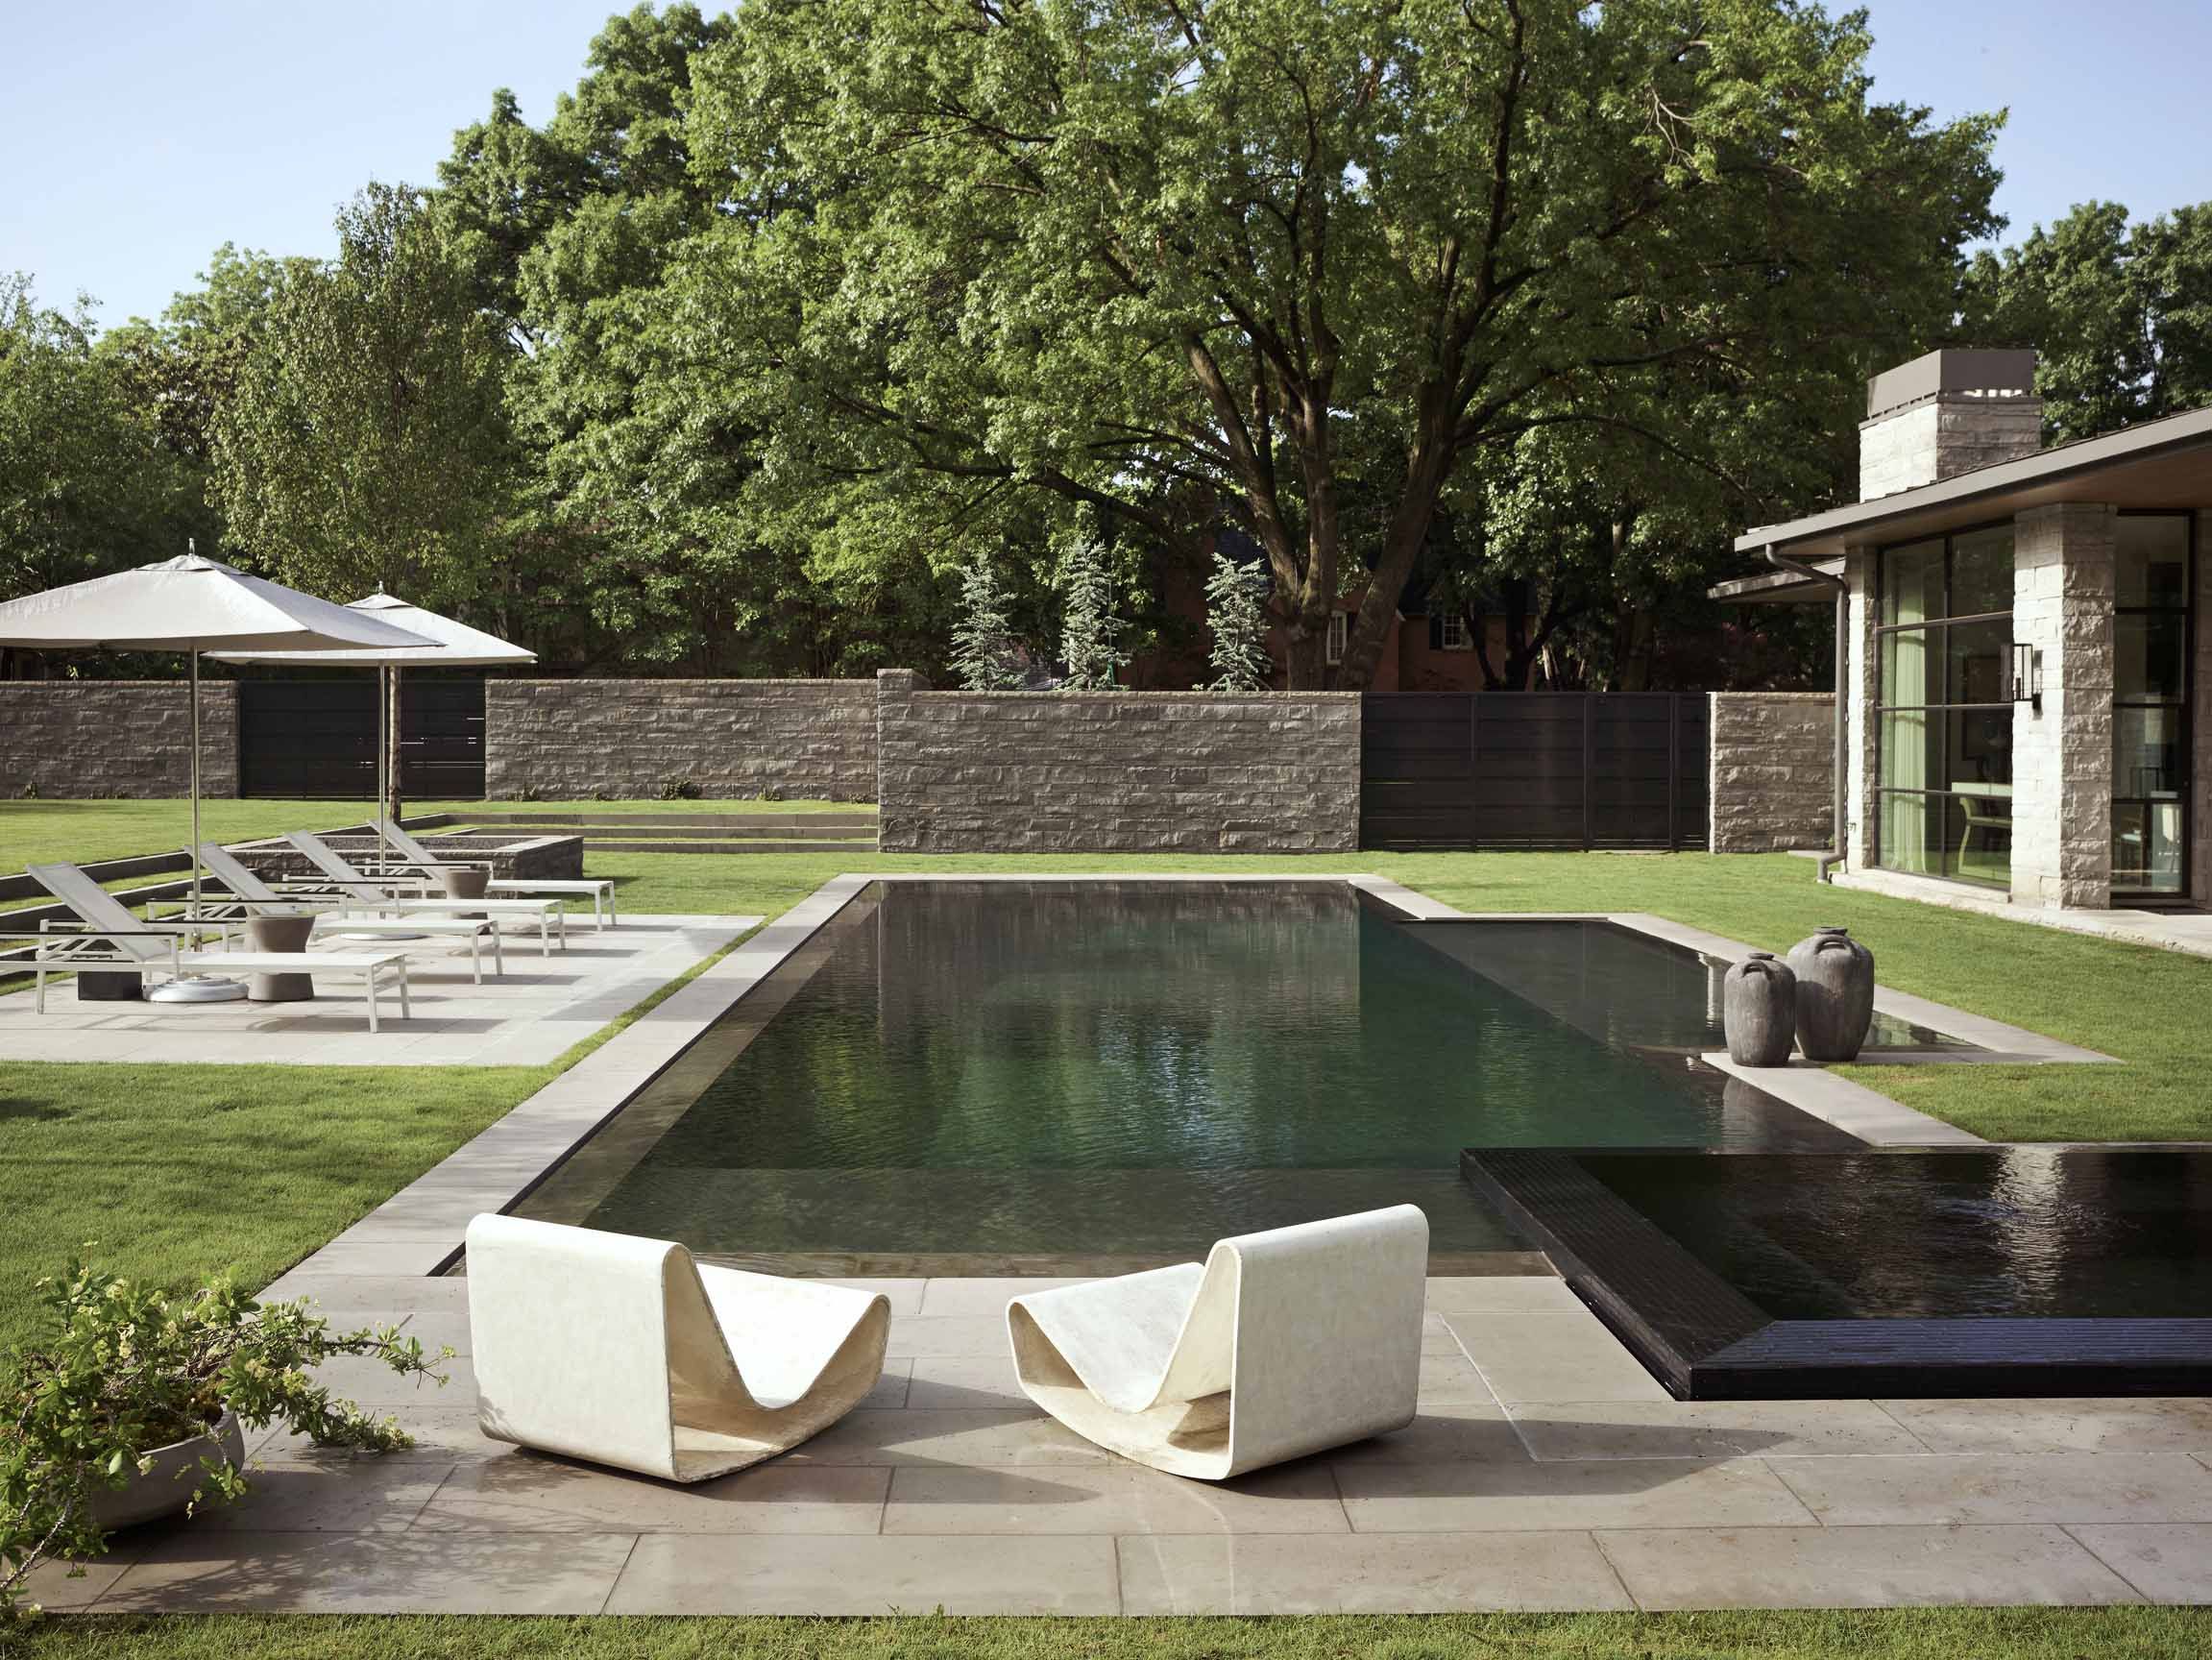 Design ideas for outdoor areas by the pool - The Architects Diary